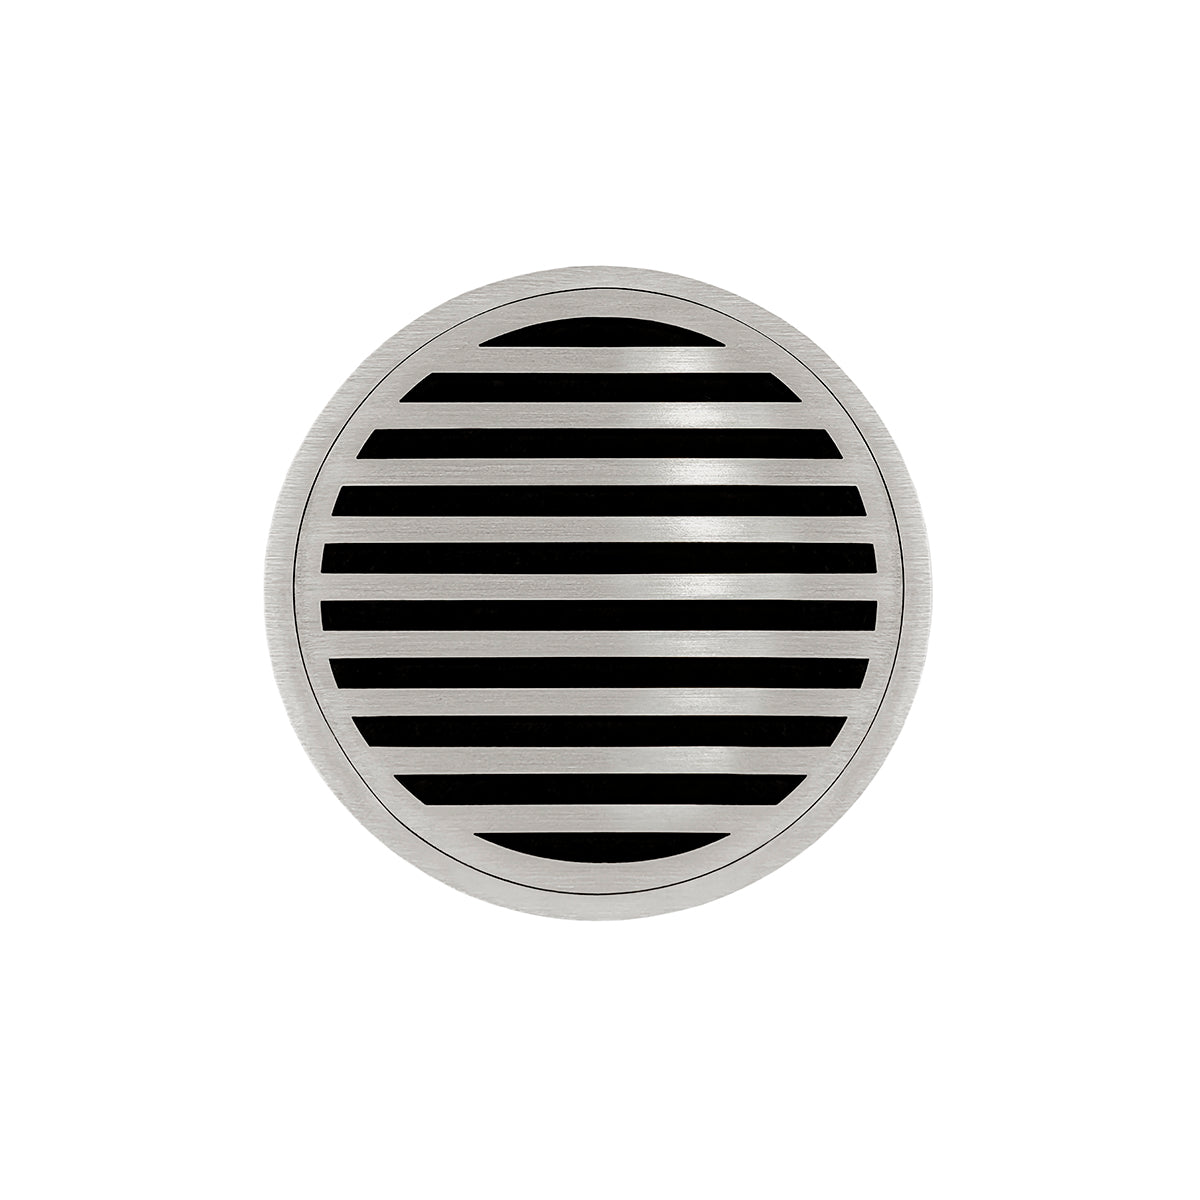 Infinity Drain 5" Round RNDB 5 Premium Center Drain Kit with Lines Pattern Decorative Plate with ABS Bonded Flange Drain Body, 2", 3" and 4" Outlet